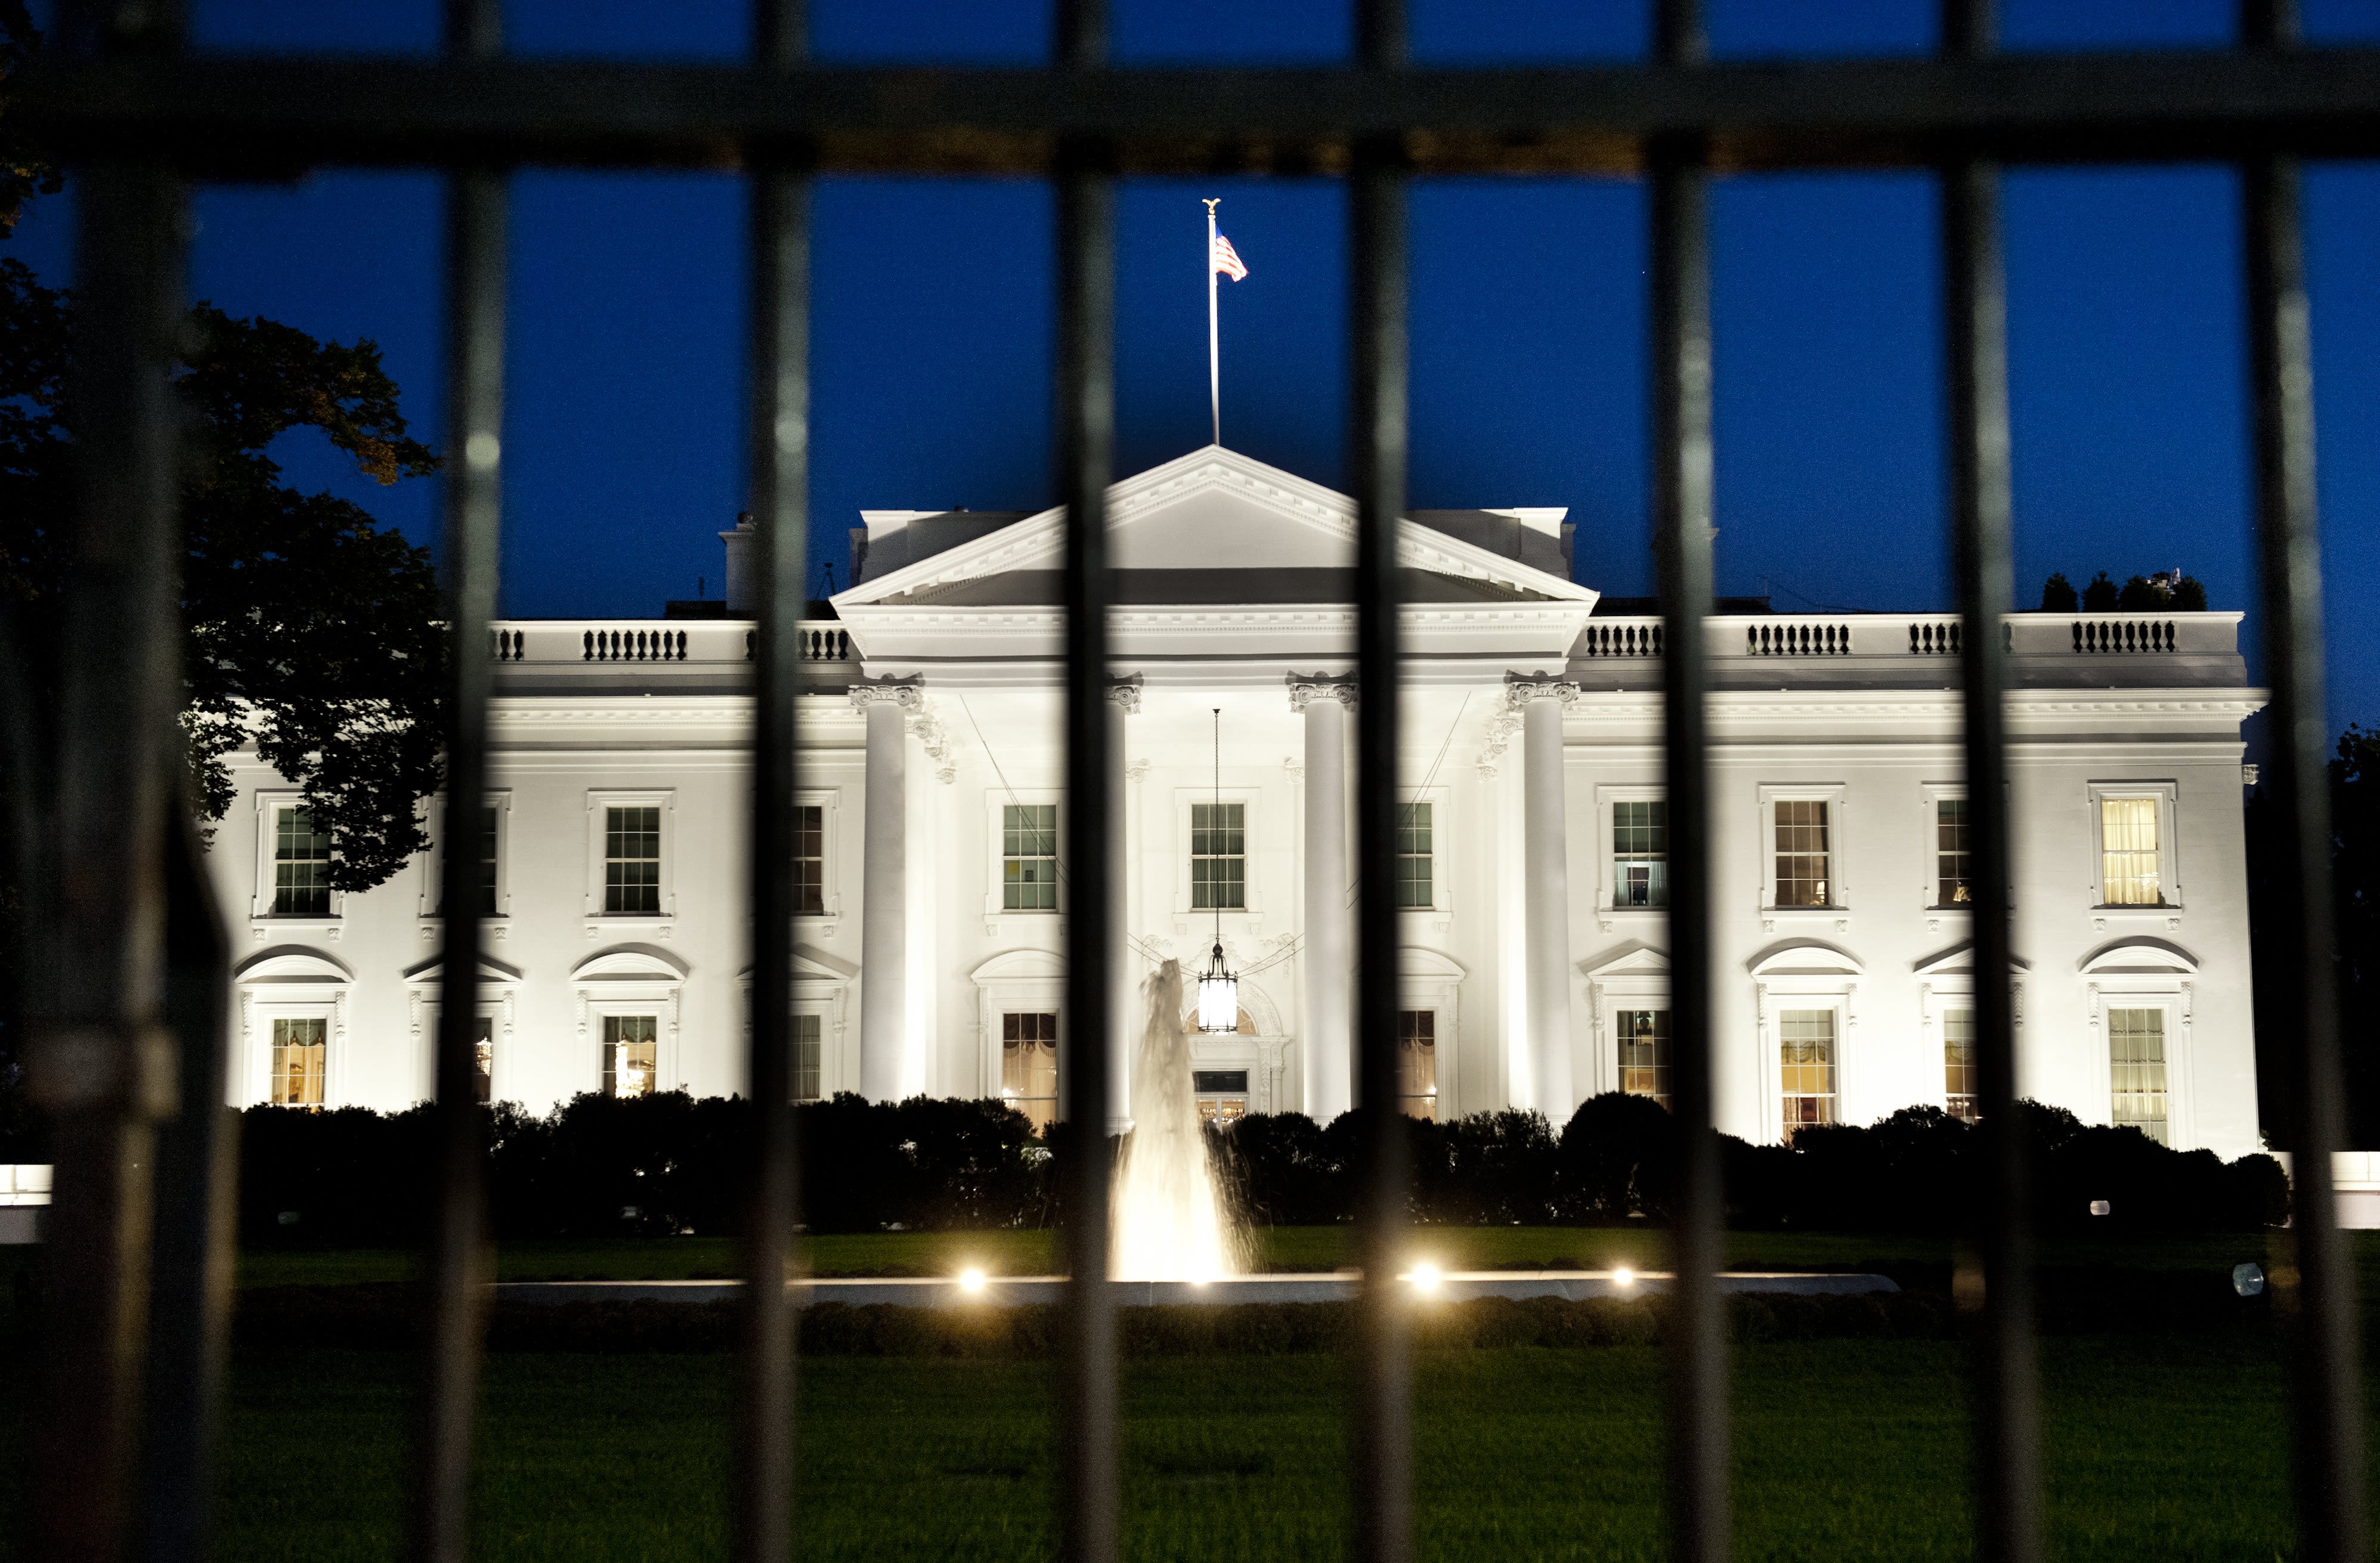 Fatal Crash Occurs as Car Collides with White House Security Gate